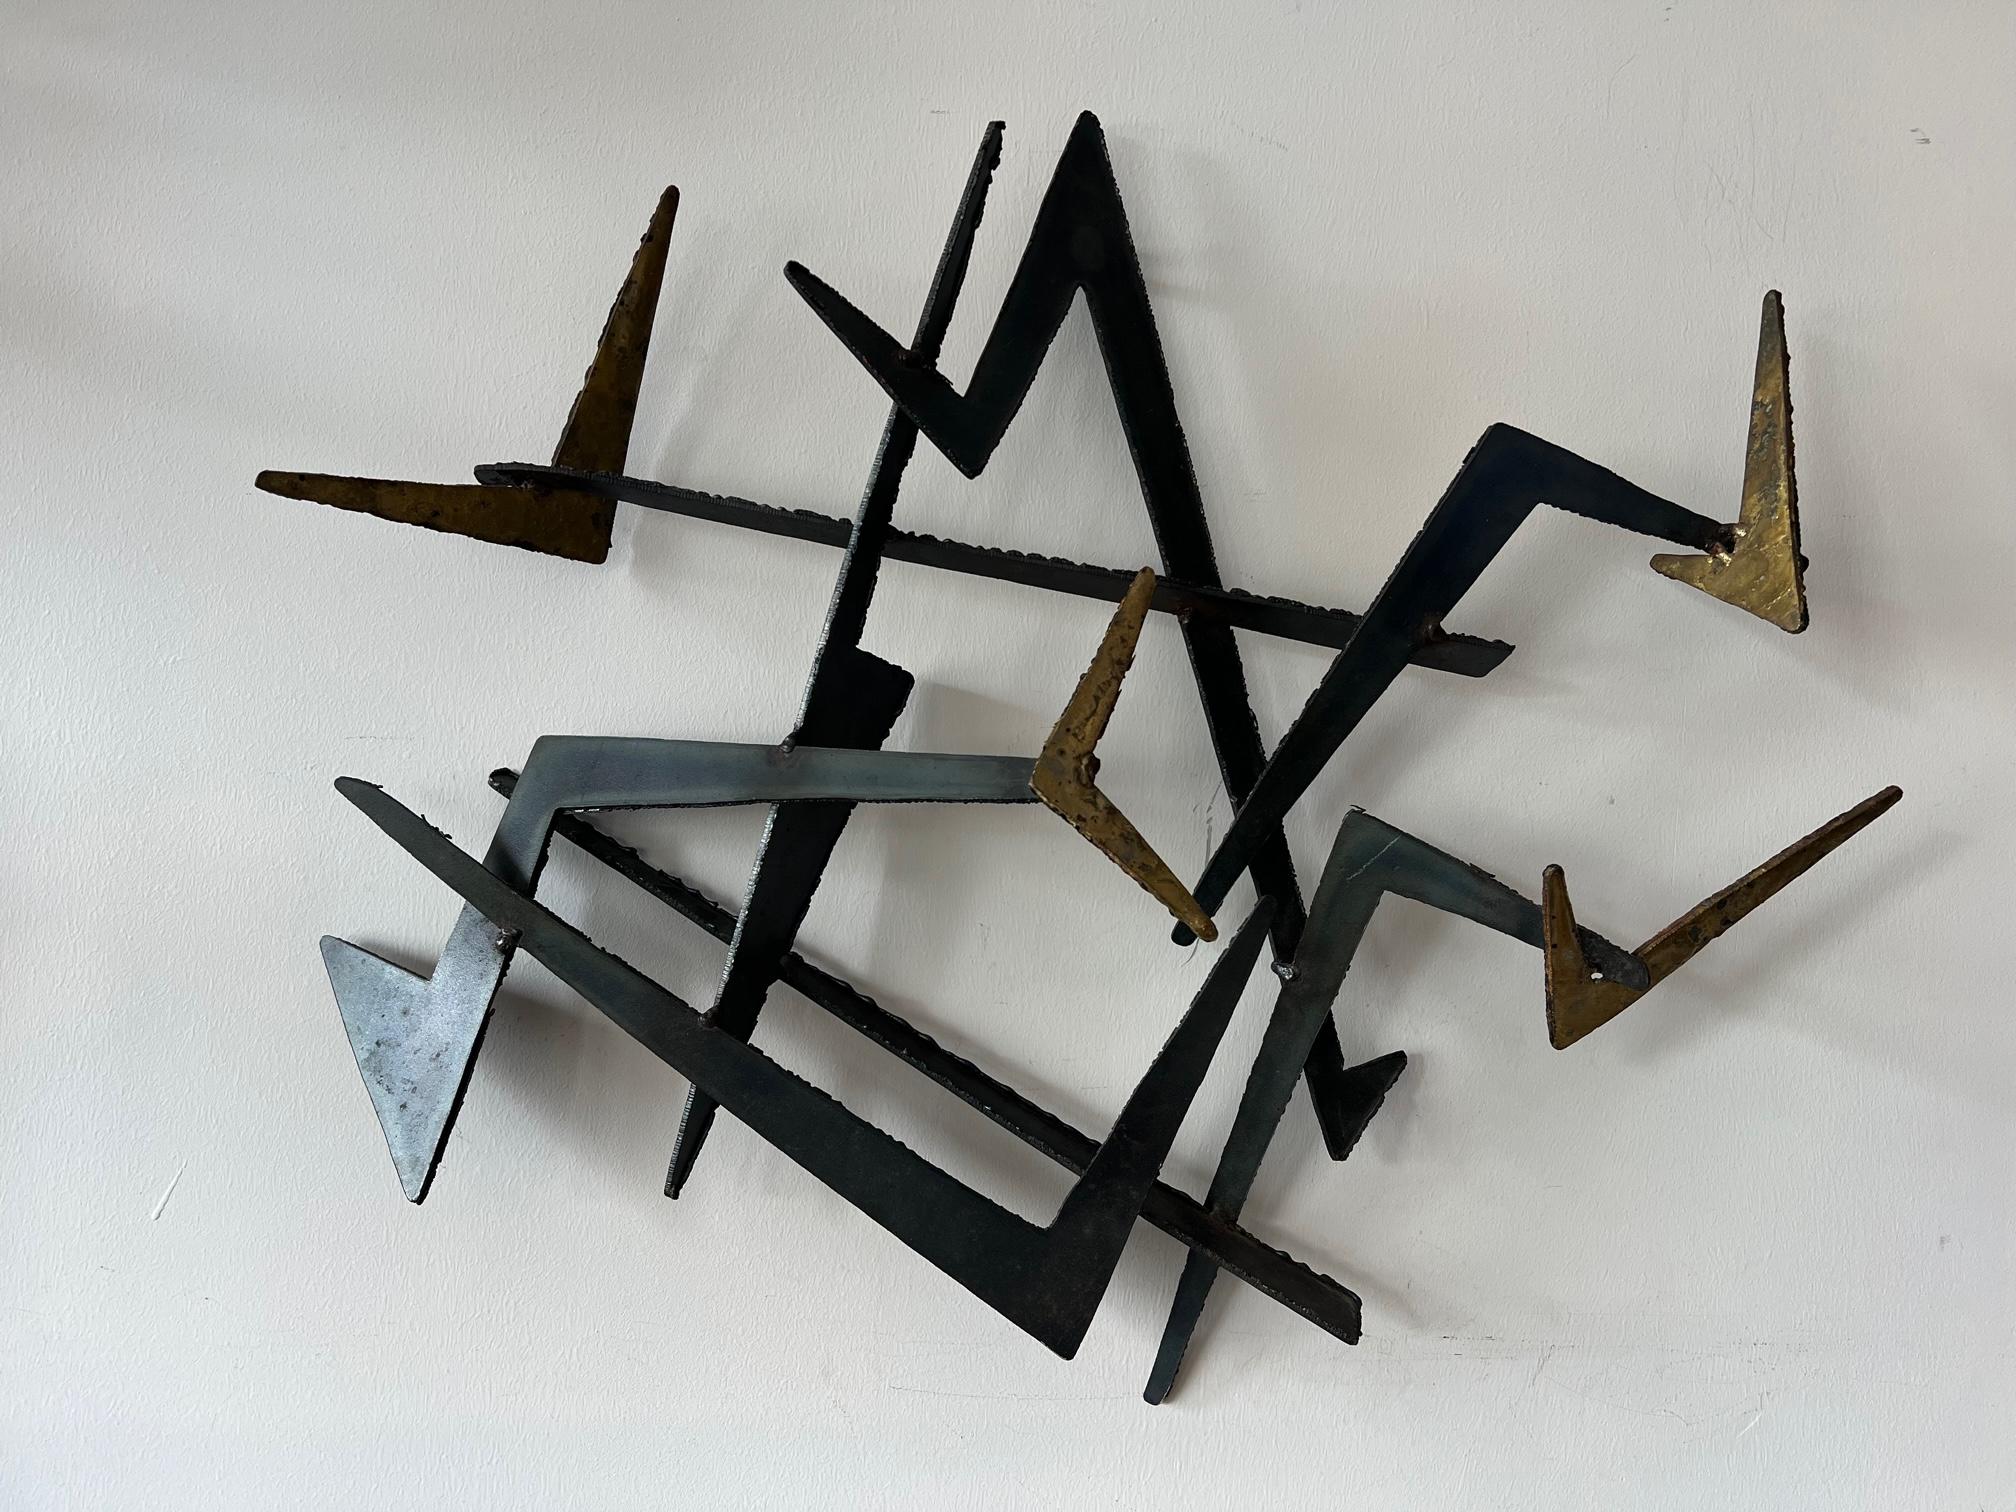 An unusual steel-torch cut and welded sculpture. Brutalist and jazzy. Unsigned. Heavy thick steel with patina and some areas gilded.